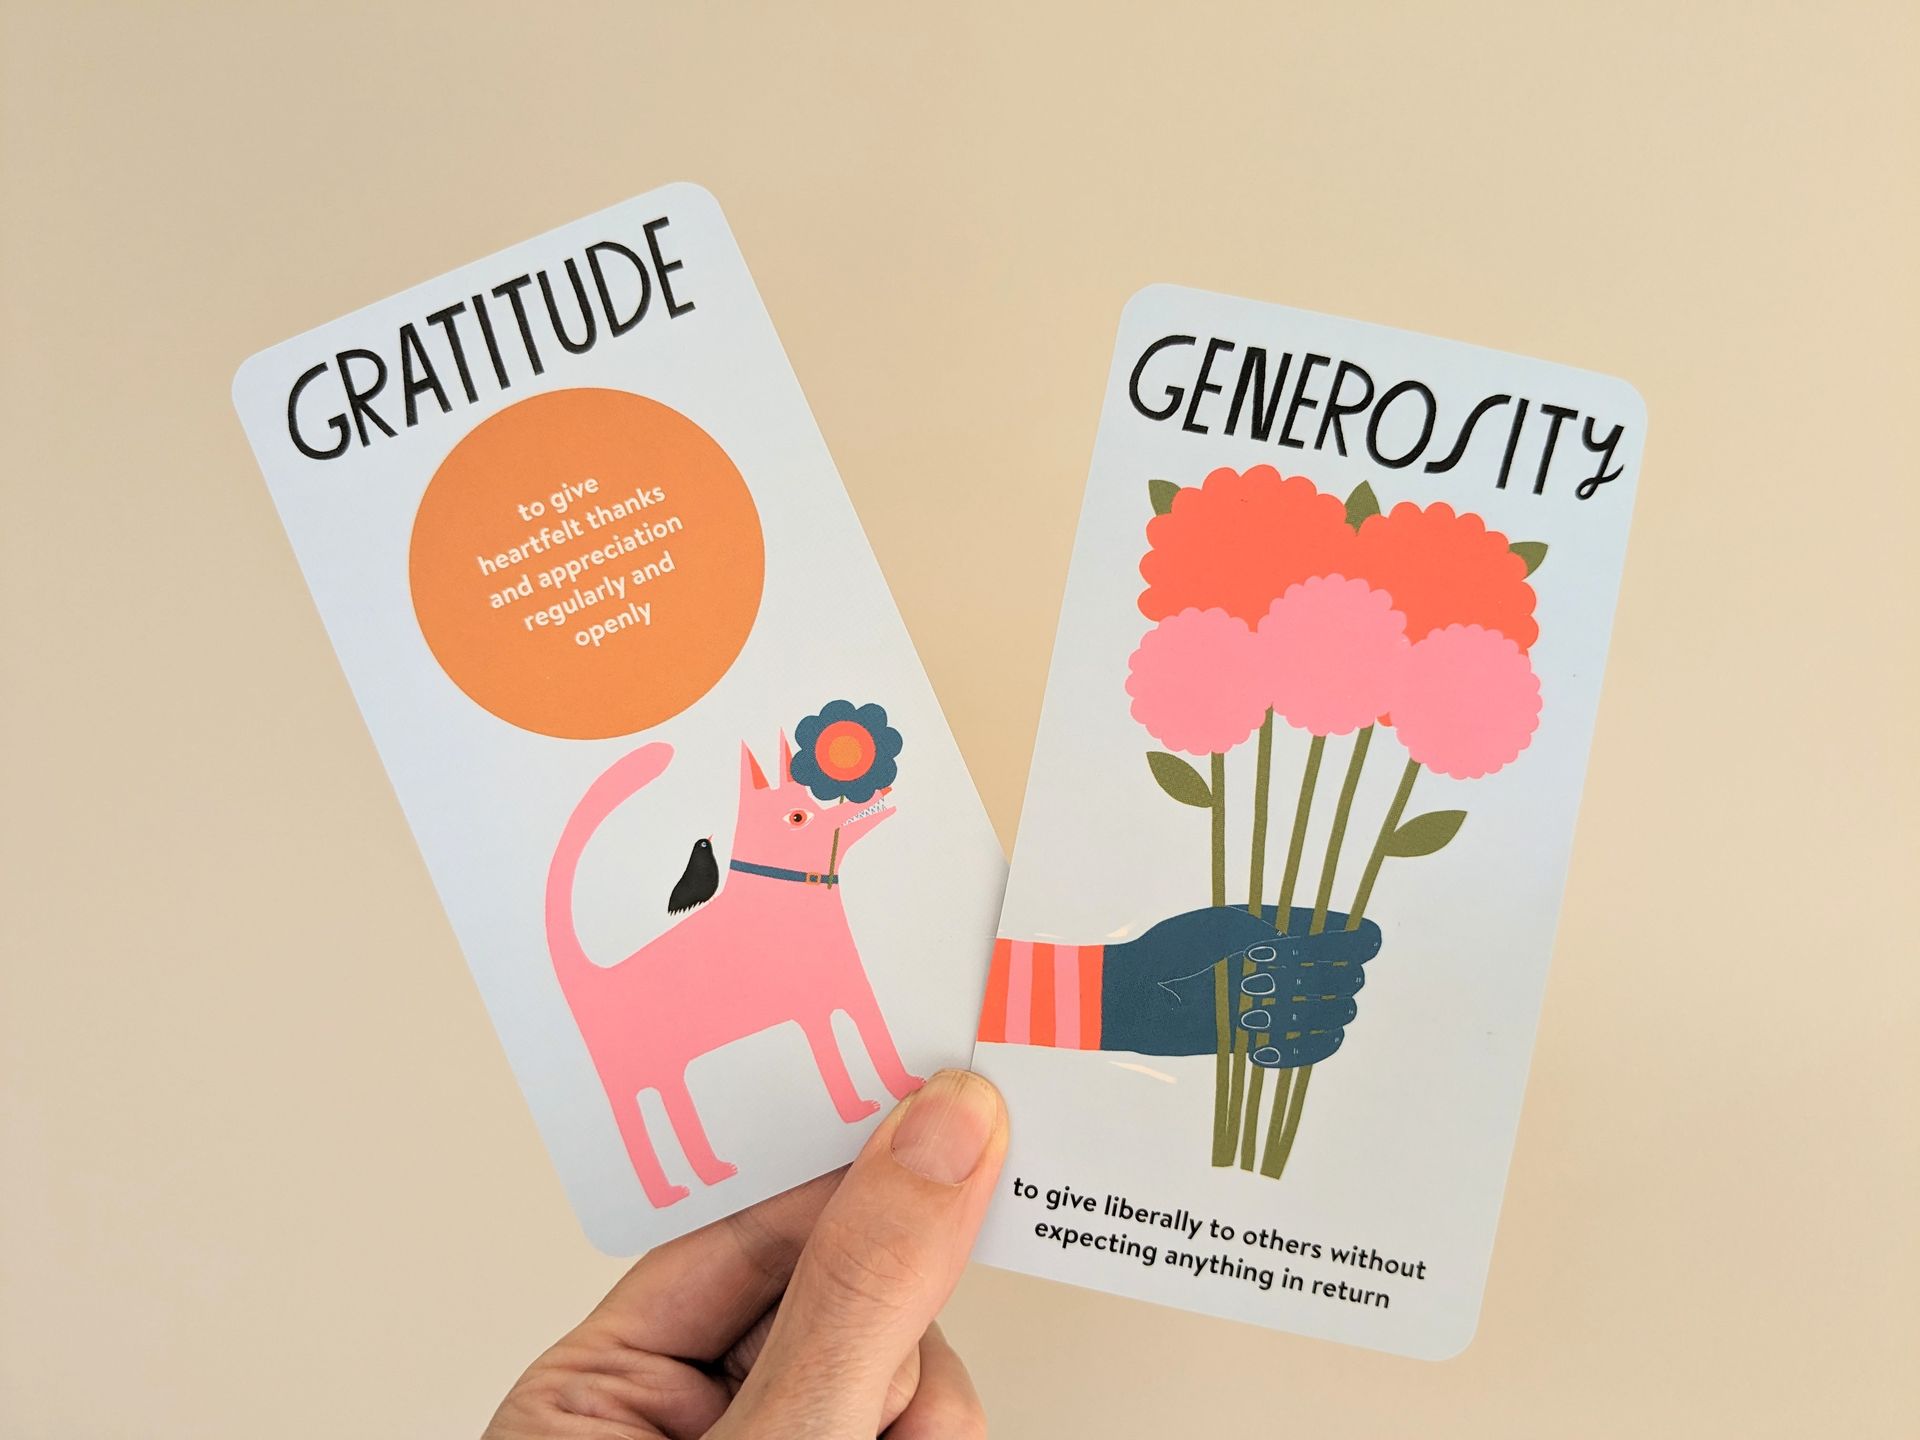 Gratitude and Generosity Cards from the Live Your Values Deck by Lisa Congdon and Andreea Niculescu